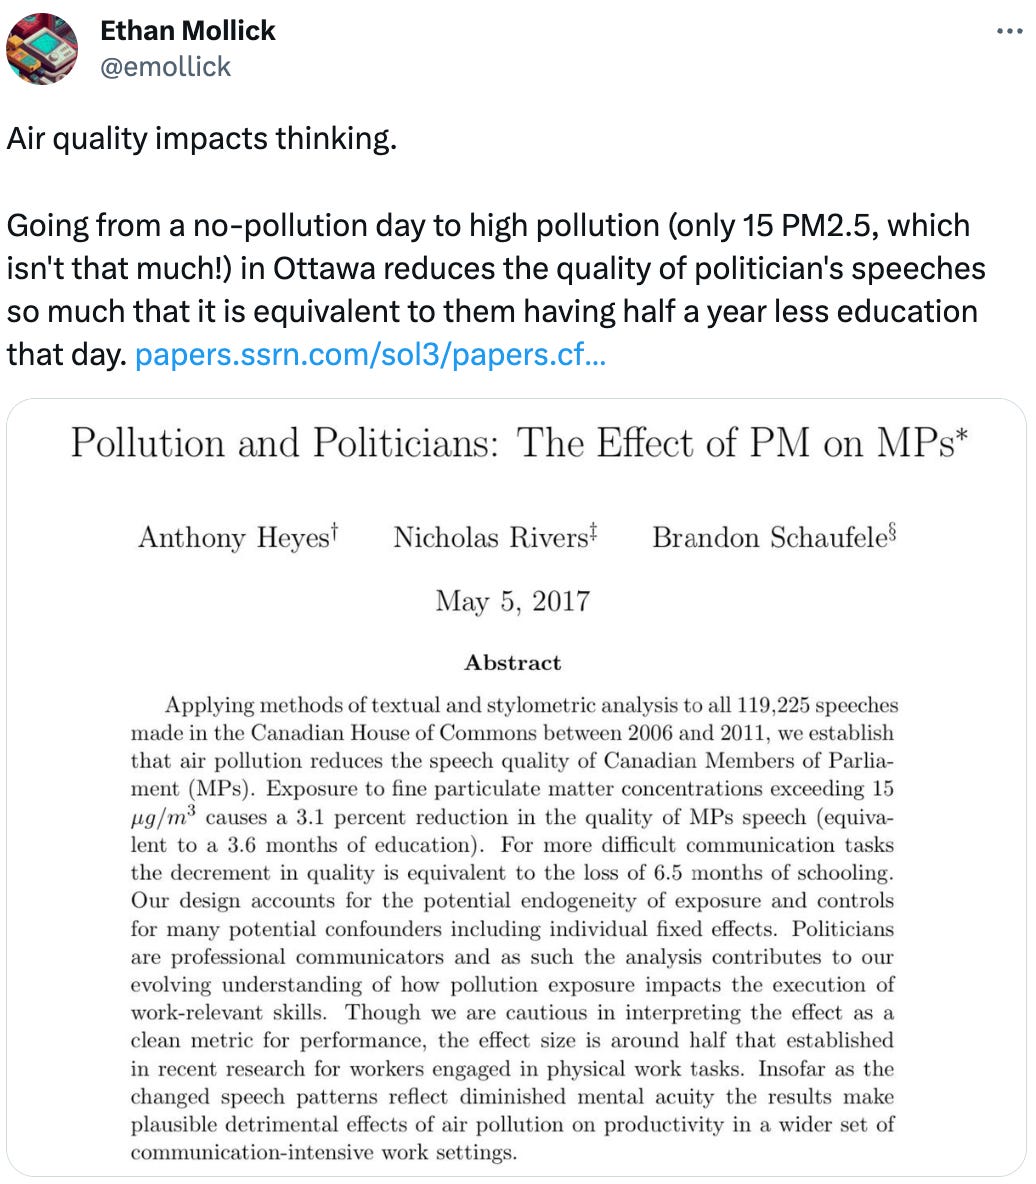  Ethan Mollick @emollick Air quality impacts thinking.  Going from a no-pollution day to high pollution (only 15 PM2.5, which isn't that much!) in Ottawa reduces the quality of politician's speeches so much that it is equivalent to them having half a year less education that day. https://papers.ssrn.com/sol3/papers.cfm?abstract_id=2852886